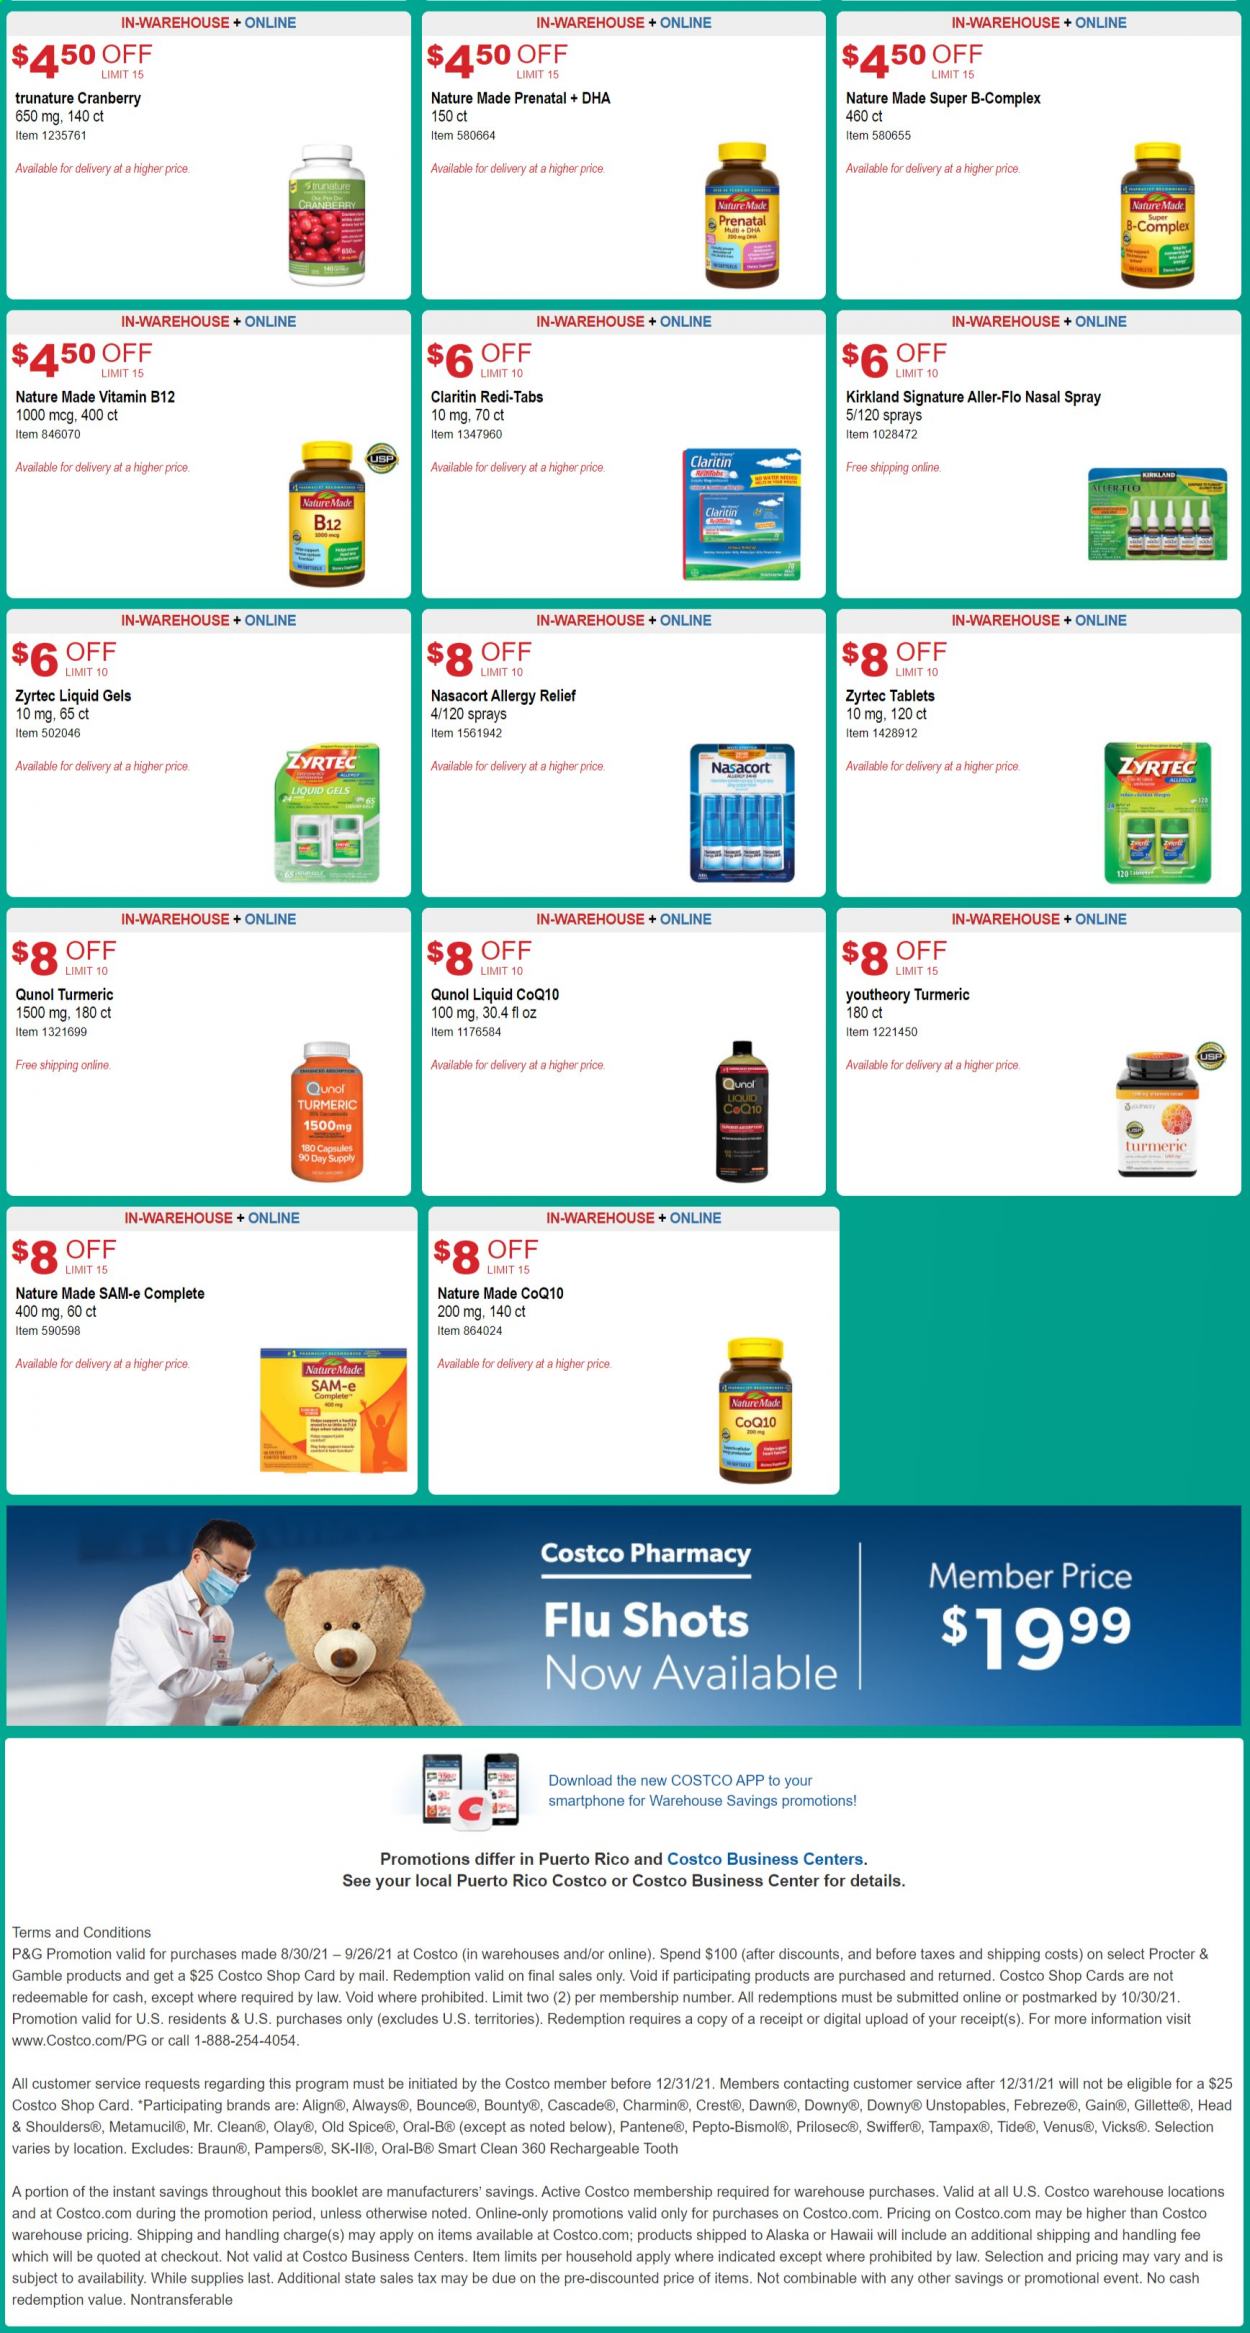 thumbnail - Costco Flyer - 09/01/2021 - 09/26/2021 - Sales products - Bounty, turmeric, spice, Pampers, Charmin, Febreze, Gain, Swiffer, Cascade, Tide, Unstopables, Bounce, Old Spice, Oral-B, Crest, Tampax, Olay, Head & Shoulders, Pantene, Gillette, Venus, Vicks, Braun, Prenatal, Nature Made, Qunol, Zyrtec, Pepto-bismol, vitamin B12, Metamucil, nasal spray, allergy relief. Page 11.